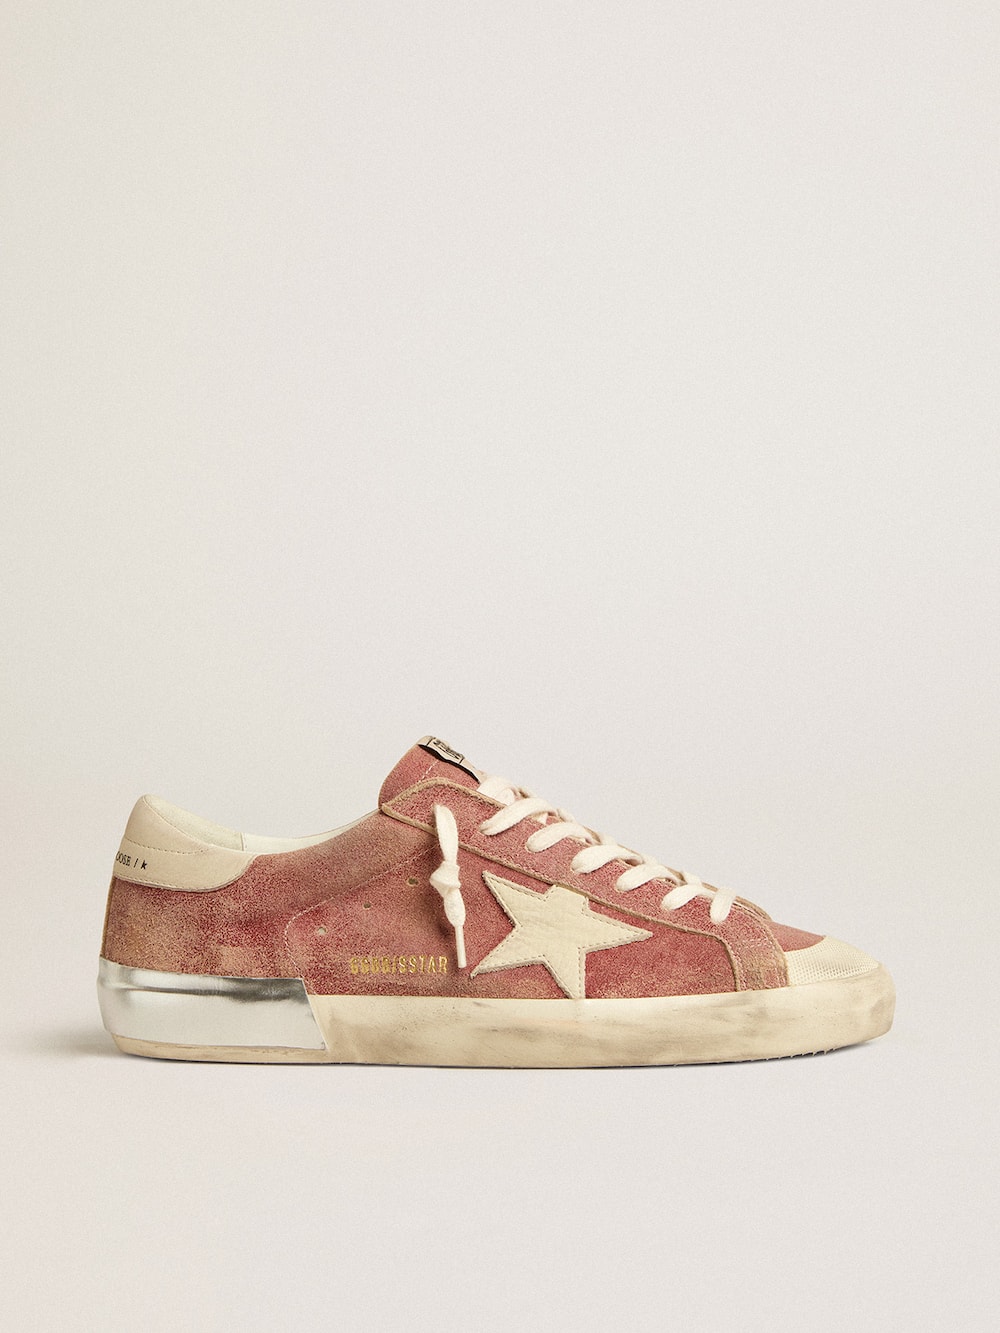 Golden Goose - Super-Star in red leather with cream nubuck star and heel tab in 